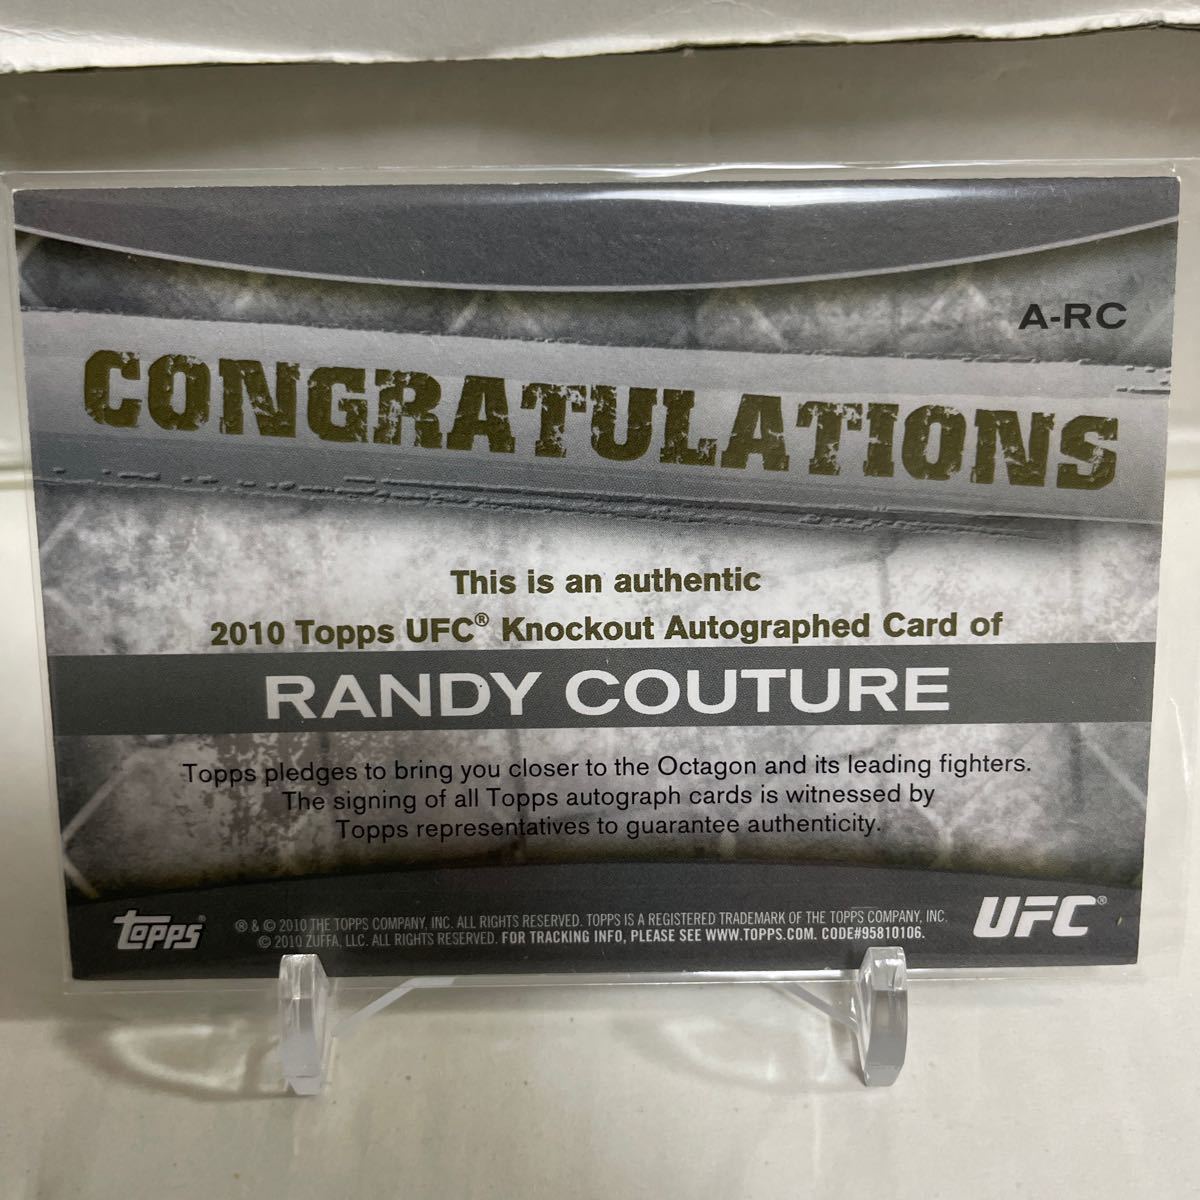 2010 TOPPS UFC Knockout RANDY COUTURE AUTO 188枚限定　043/188 直筆サイン　元UFCヘビー級、ライトヘビー級王者　ランディ・クートゥア_画像2